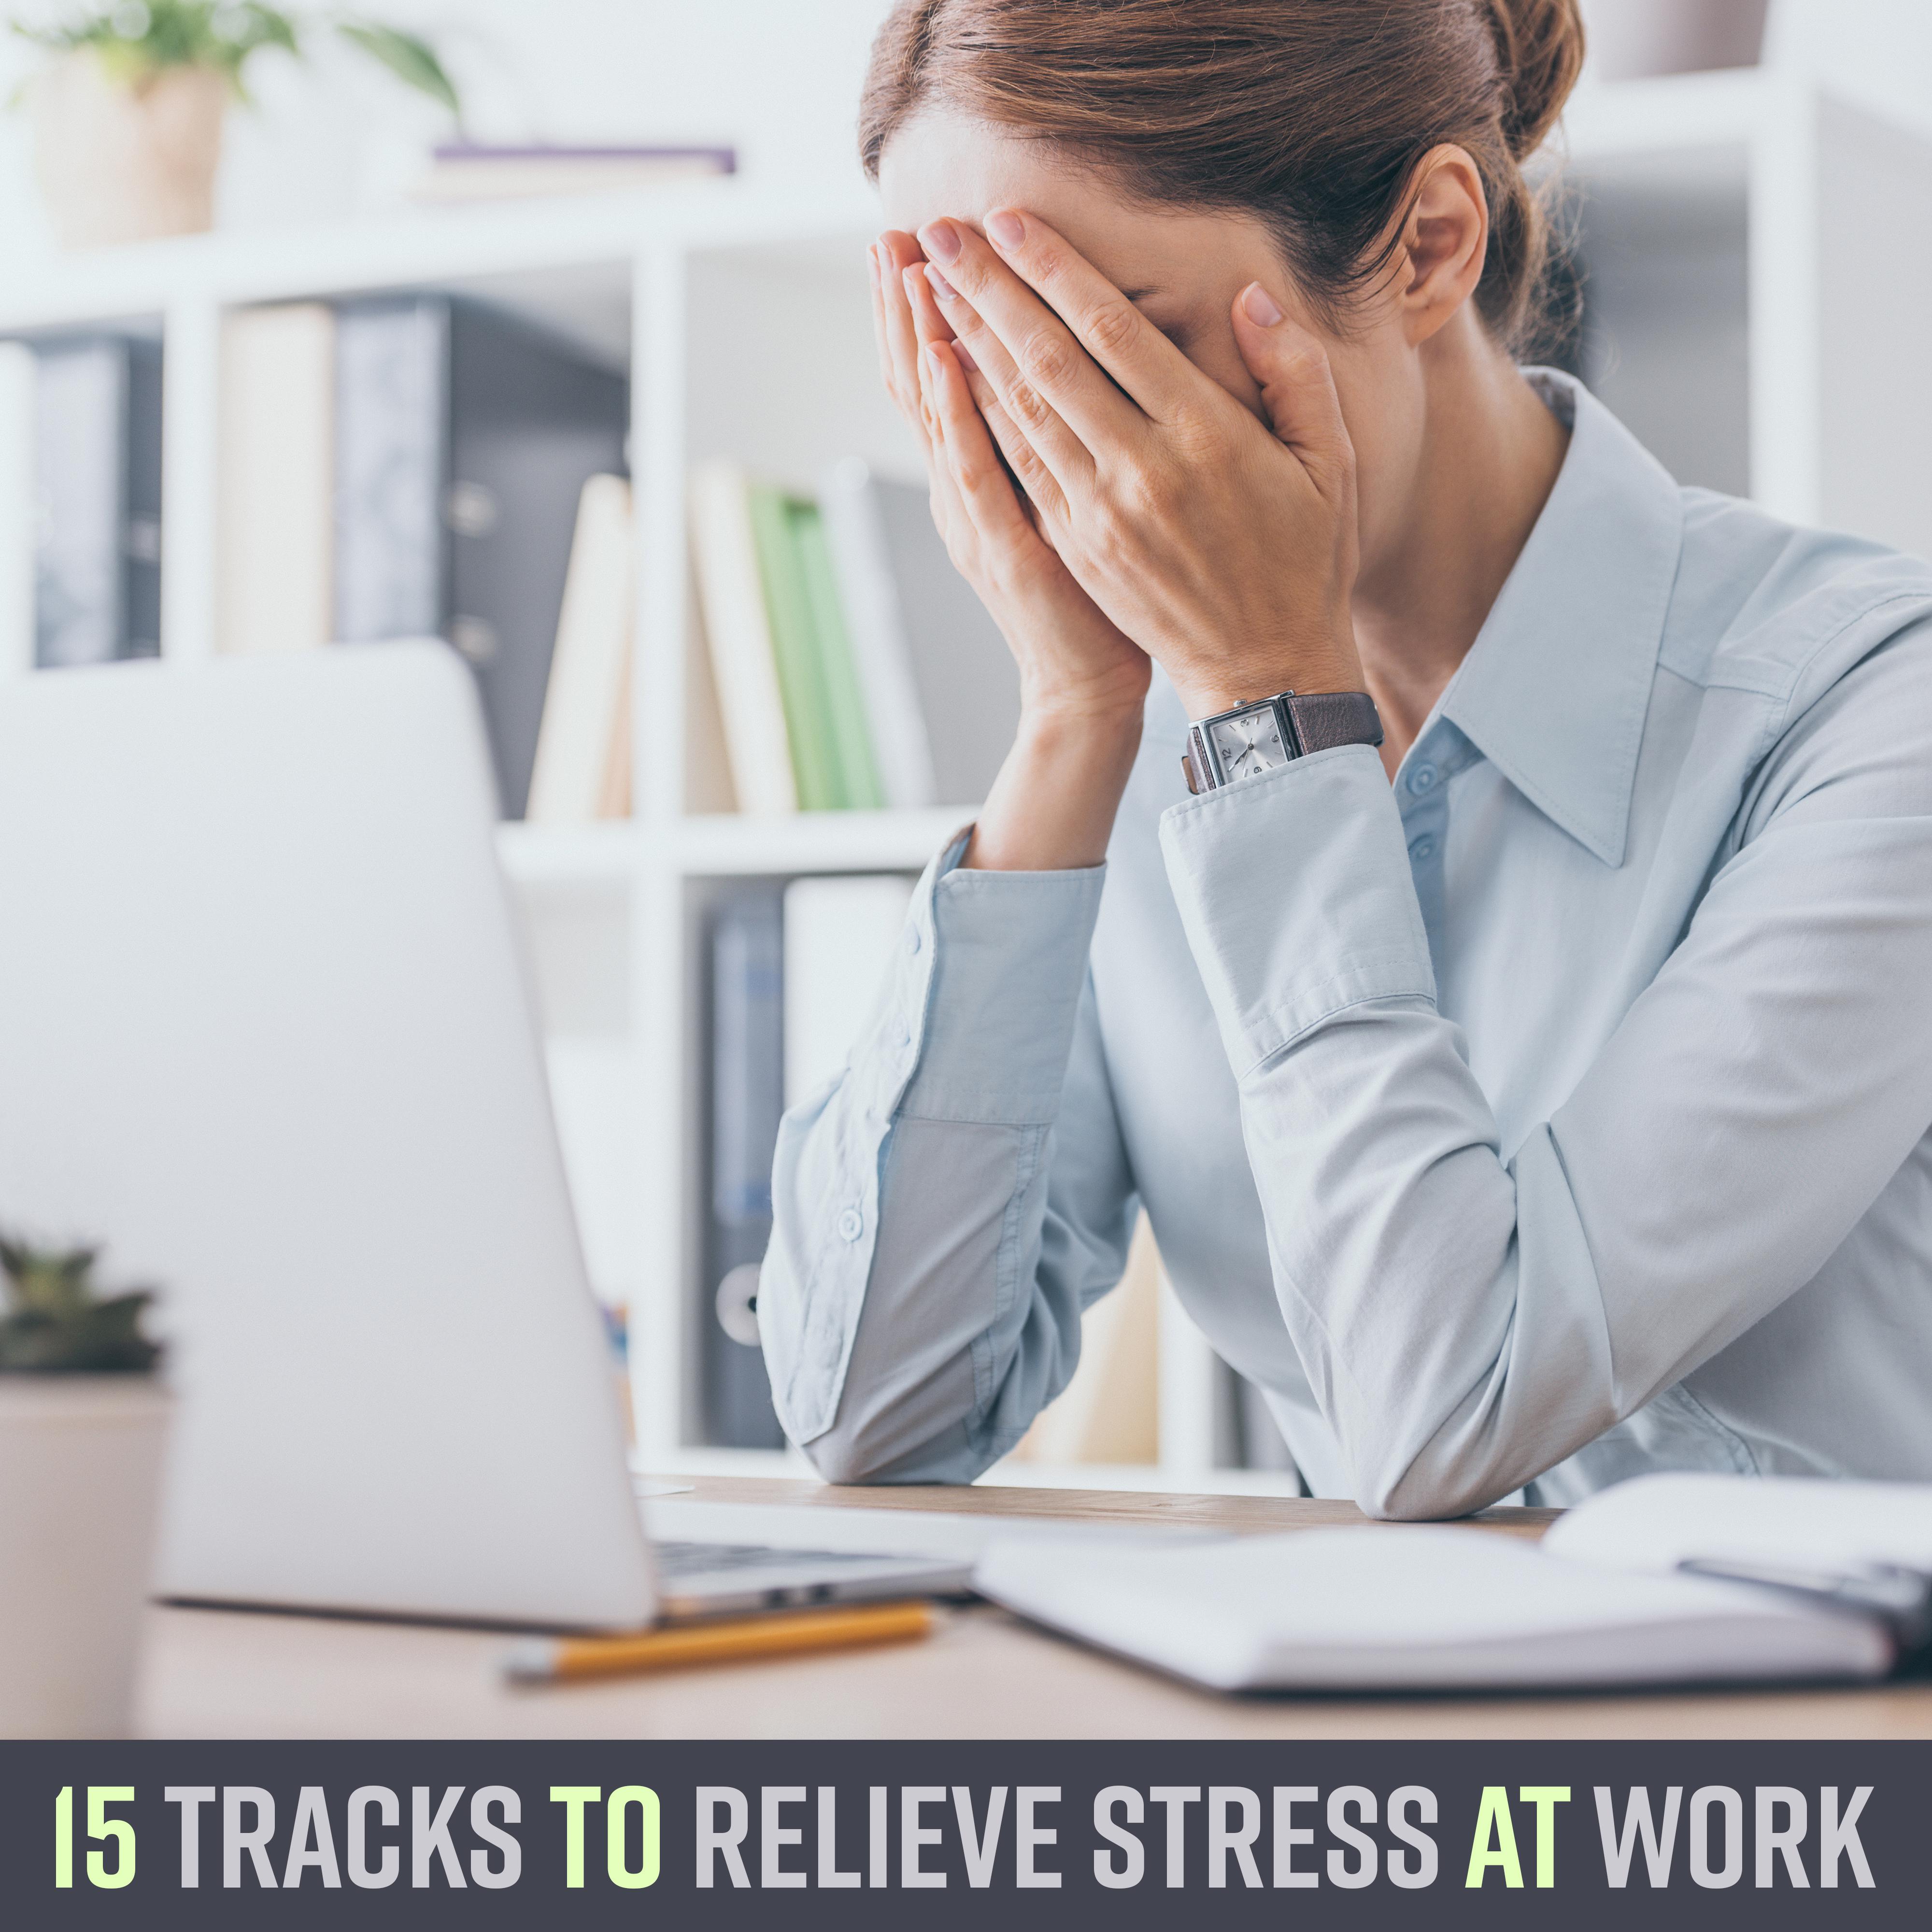 15 Tracks to Relieve Stress at Work